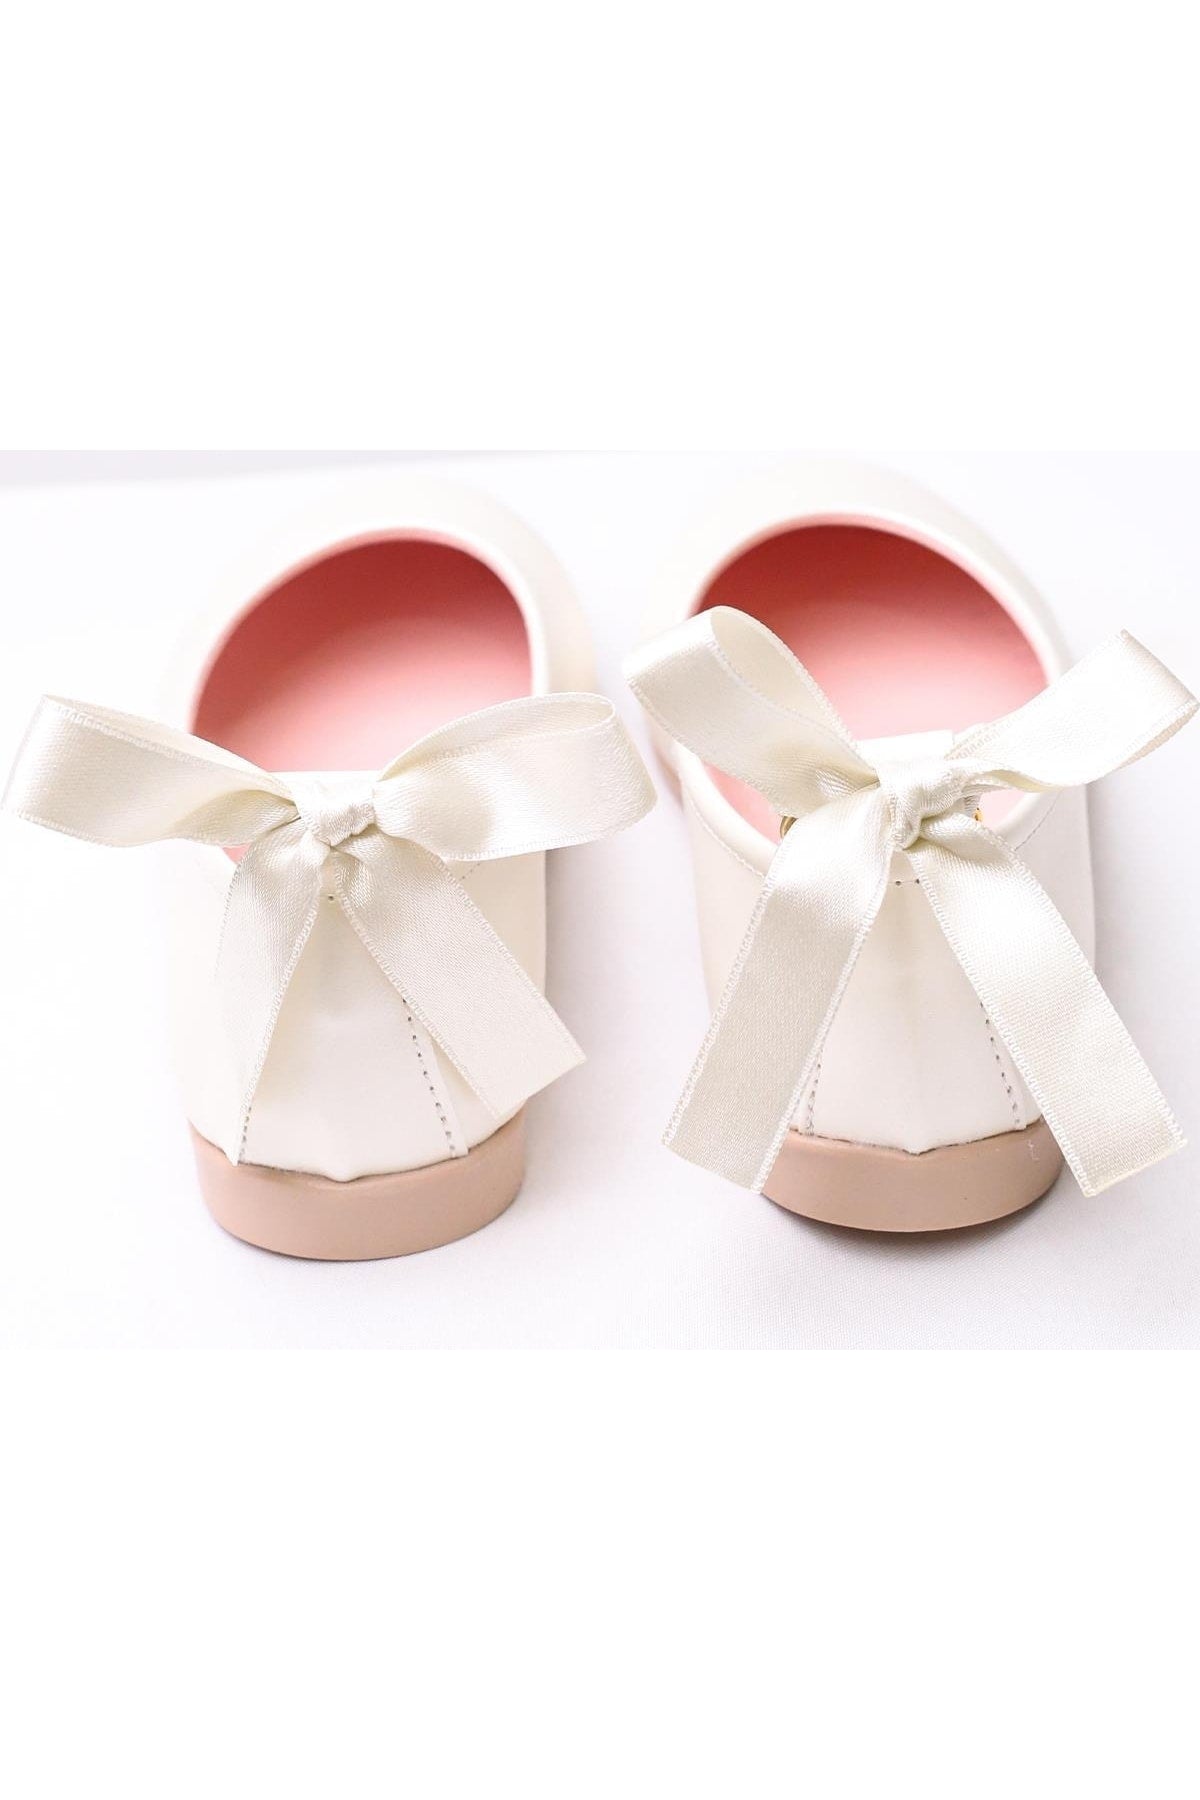 Pearl Ankle Girls Baby Flats